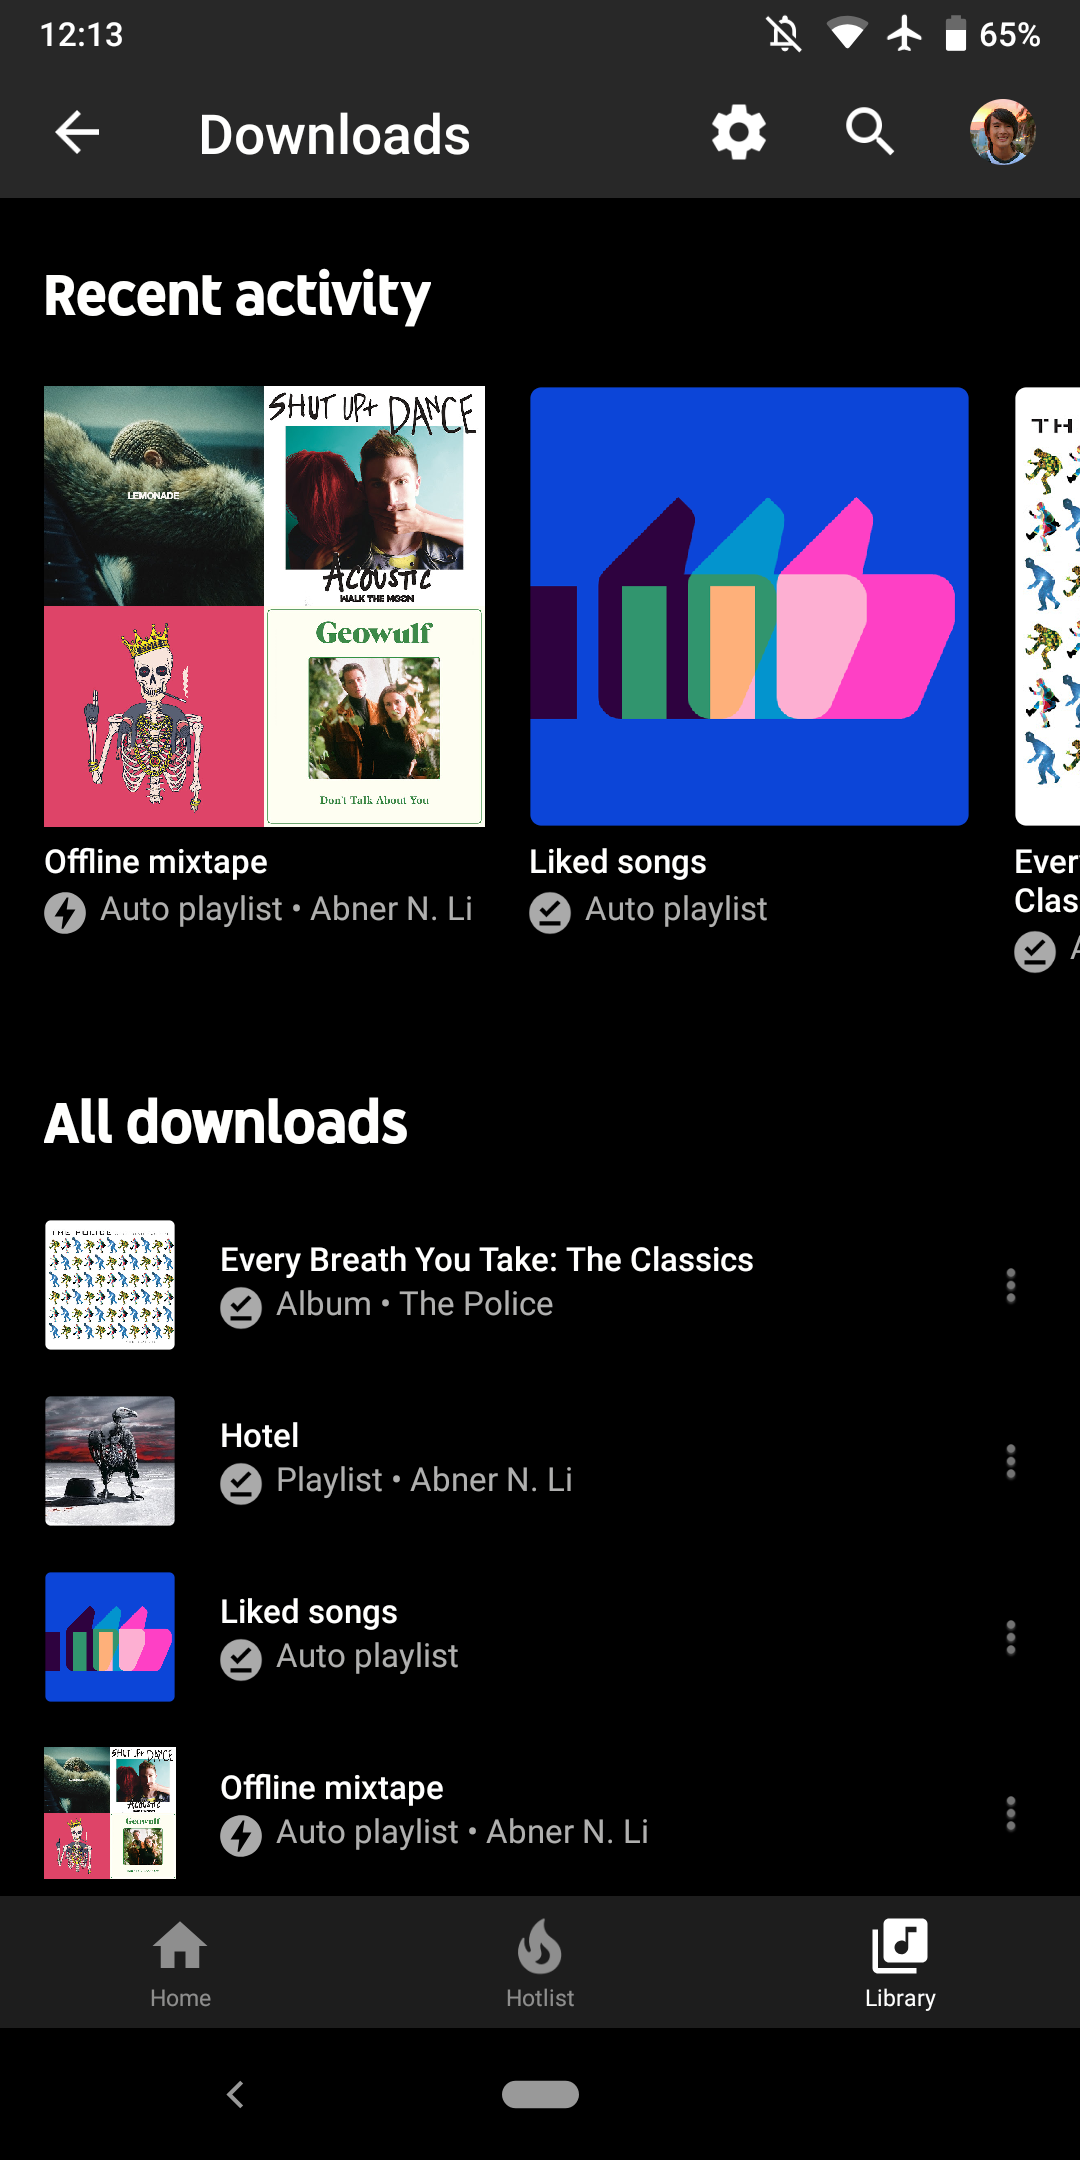 youtube music download us